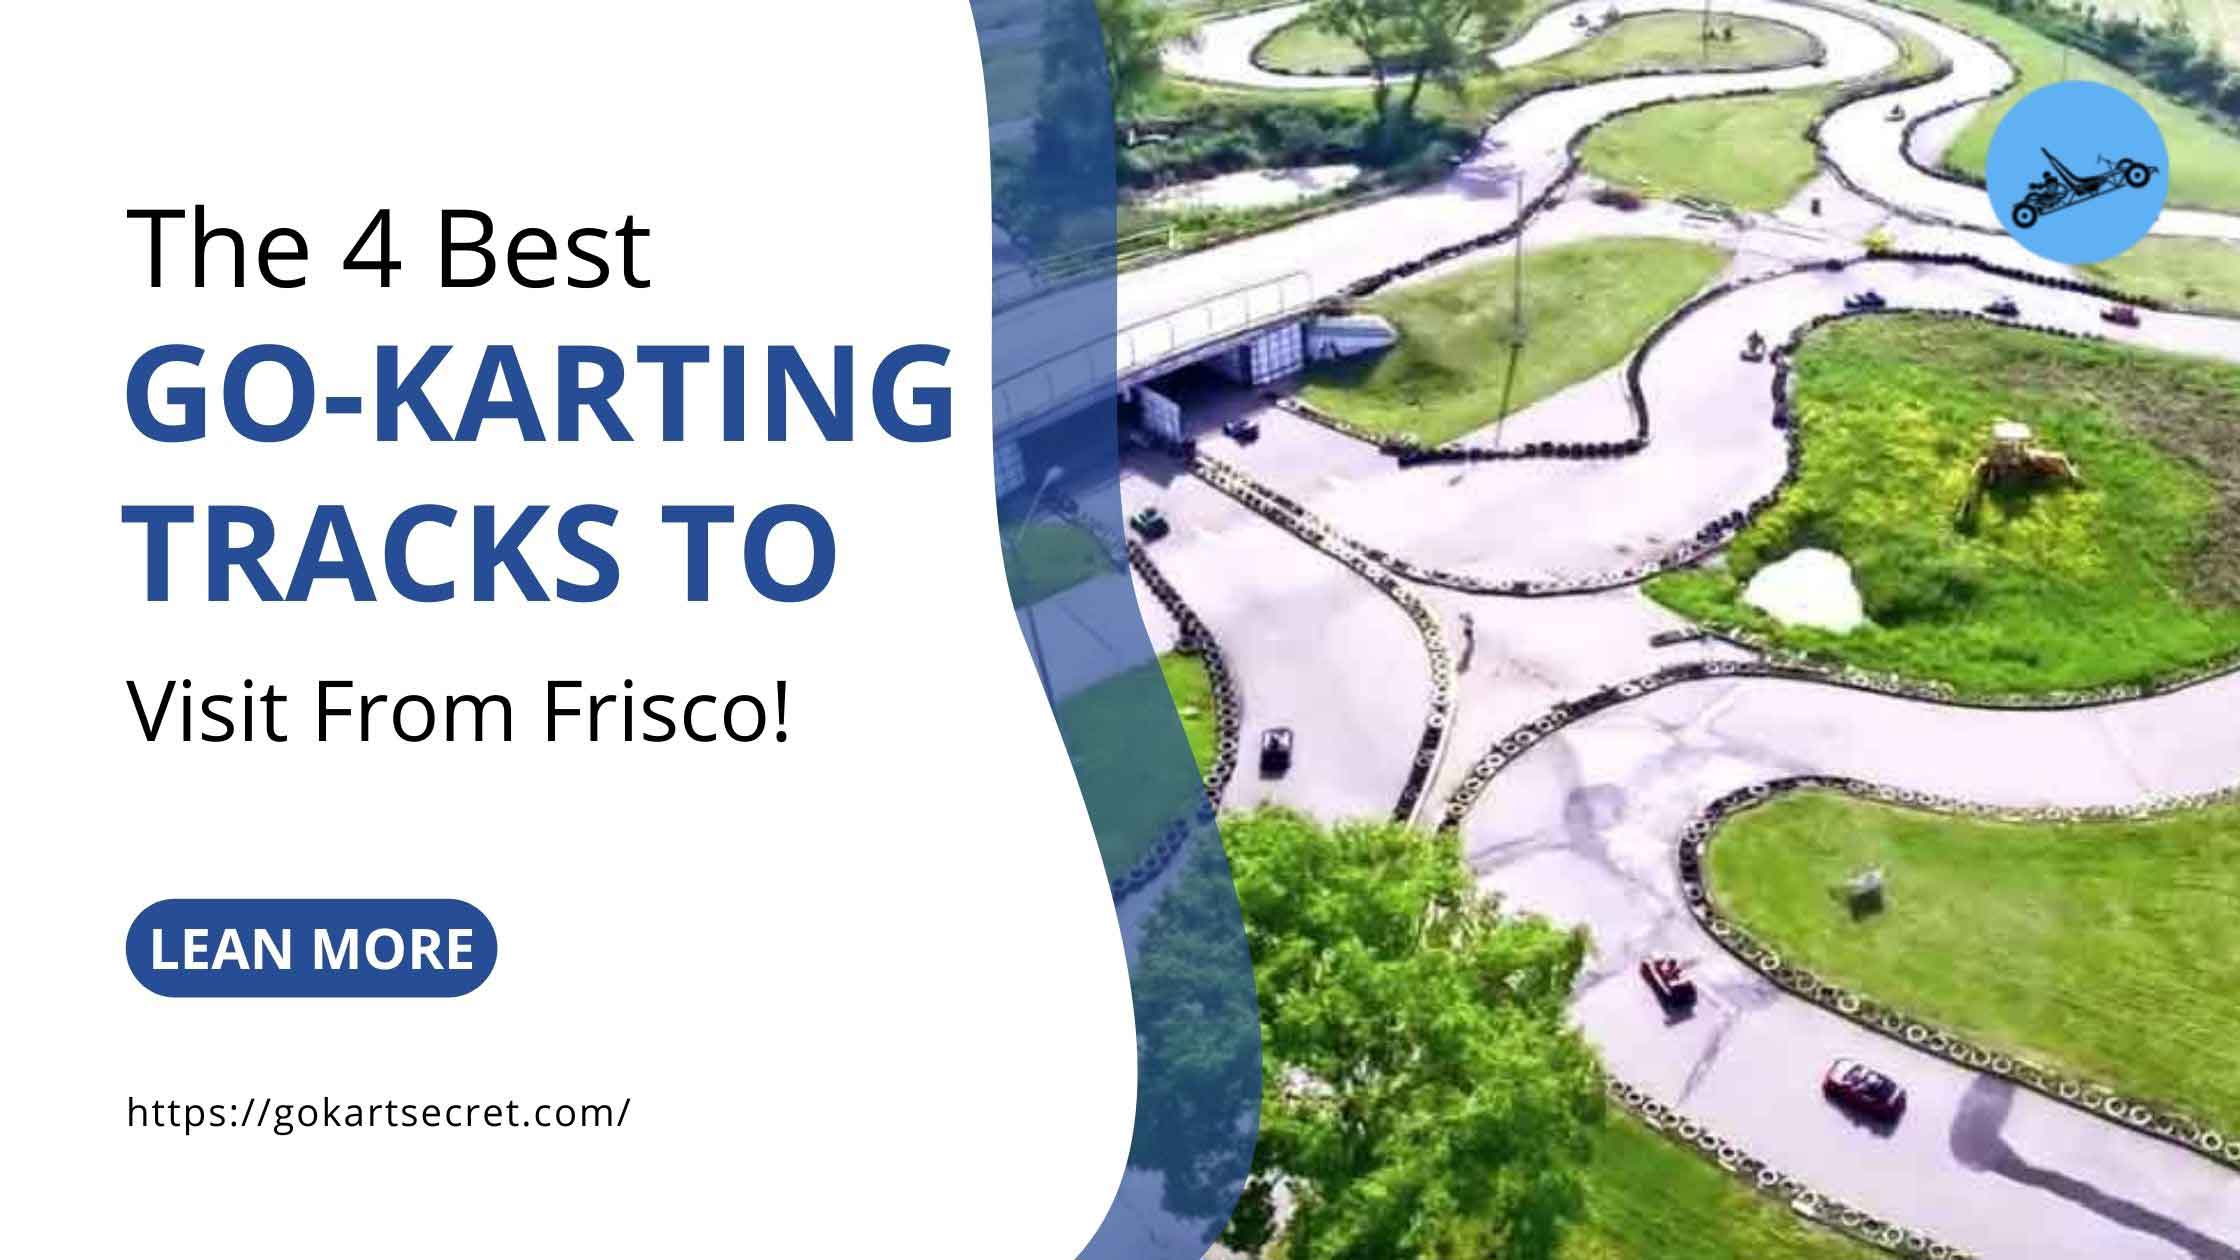 The 4 Best Go-Karting Tracks To Visit From Frisco